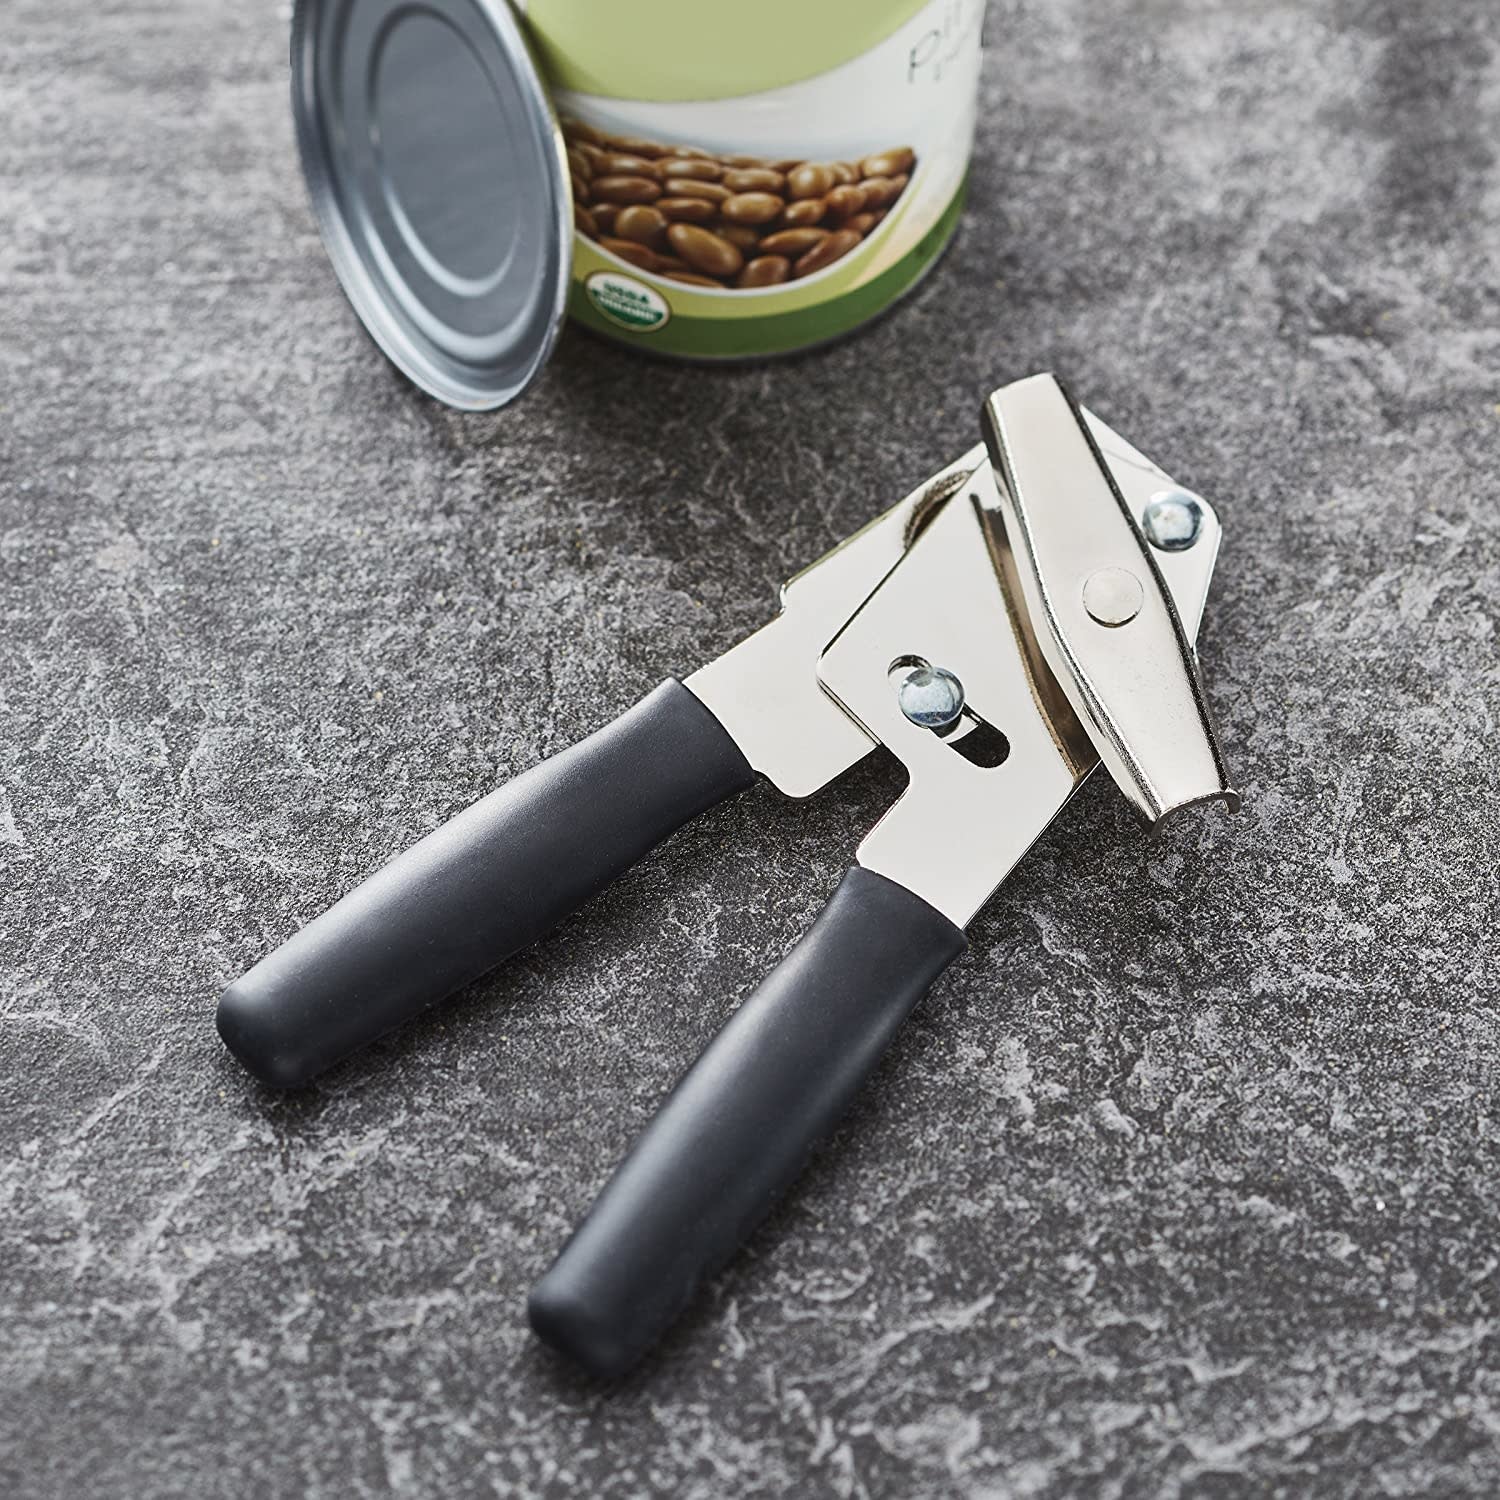 Swing-A-Way Easy Crank Can Opener (Green) Extra Long